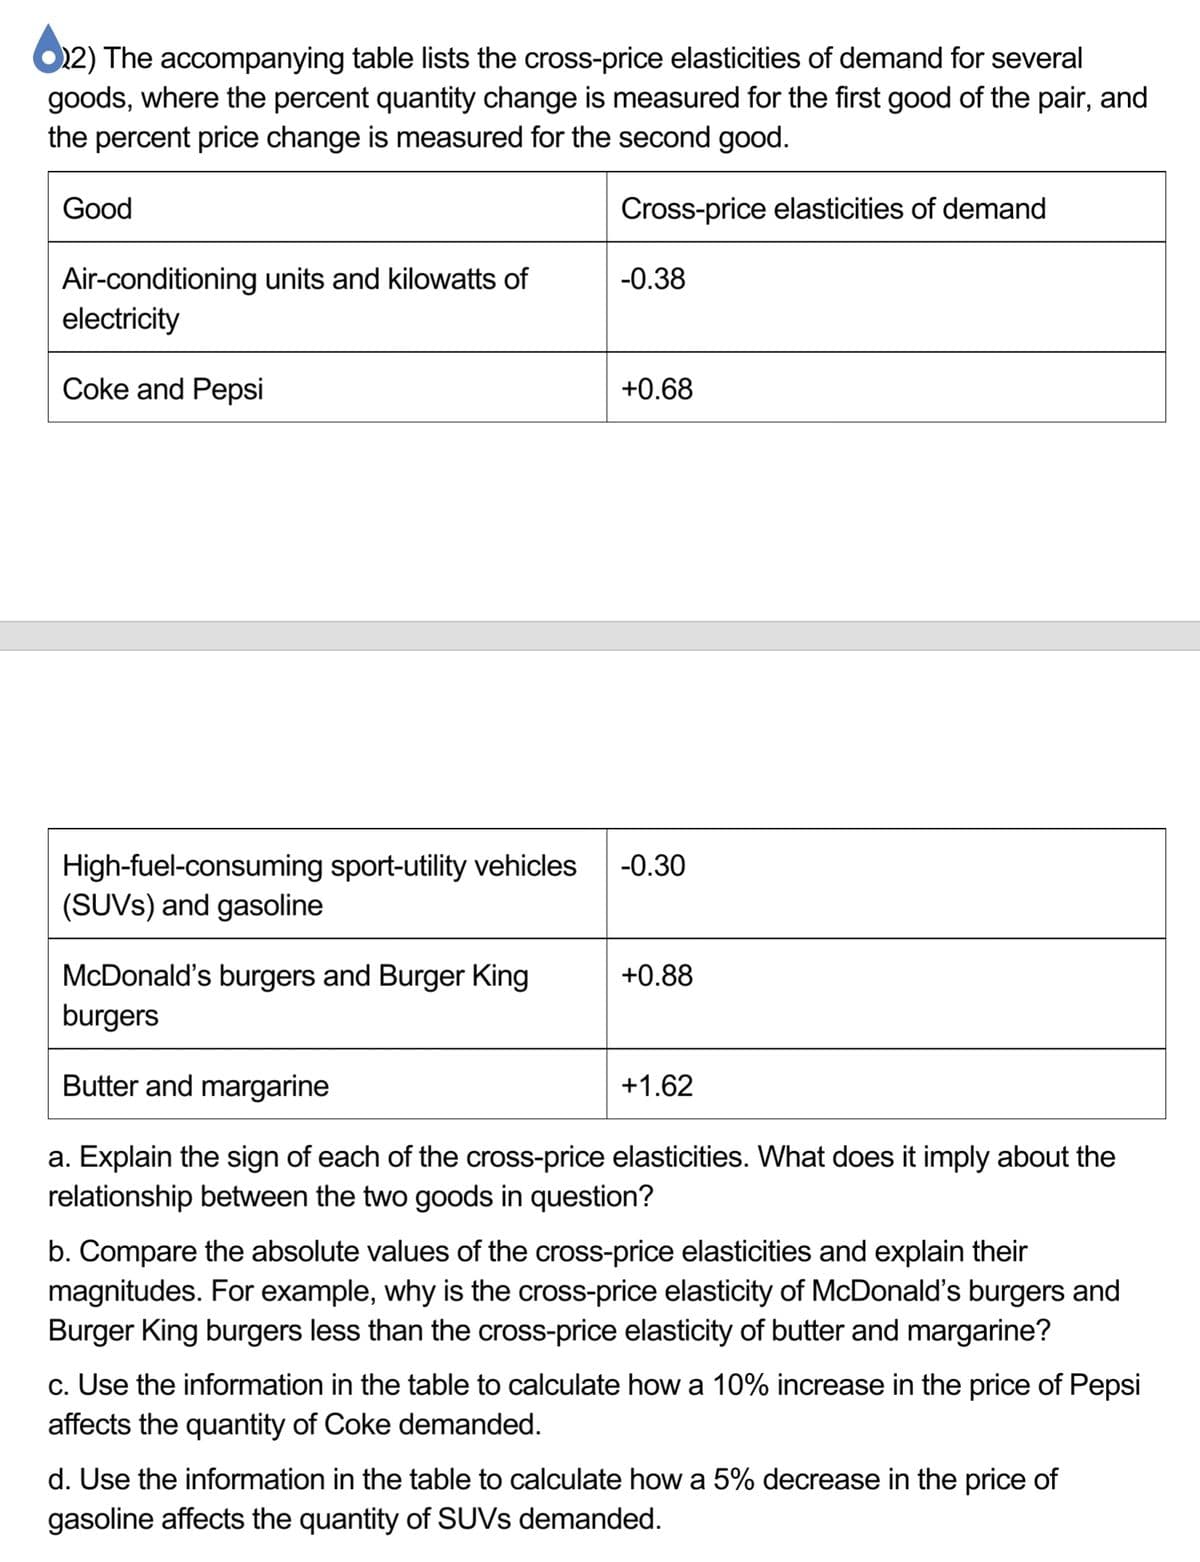 622) The accompanying table lists the cross-price elasticities of demand for several
goods, where the percent quantity change is measured for the first good of the pair, and
the percent price change is measured for the second good.
Cross-price elasticities of demand
Good
Air-conditioning units and kilowatts of
electricity
Coke and Pepsi
-0.38
+0.68
High-fuel-consuming sport-utility vehicles -0.30
(SUVS) and gasoline
McDonald's burgers and Burger King
burgers
Butter and margarine
a. Explain the sign of each of the cross-price elasticities. What does it imply about the
relationship between the two goods in question?
+0.88
+1.62
b. Compare the absolute values of the cross-price elasticities and explain their
magnitudes. For example, why is the cross-price elasticity of McDonald's burgers and
Burger King burgers less than the cross-price elasticity of butter and margarine?
c. Use the information in the table to calculate how a 10% increase in the price of Pepsi
affects the quantity of Coke demanded.
d. Use the information in the table to calculate how a 5% decrease in the price of
gasoline affects the quantity of SUVS demanded.